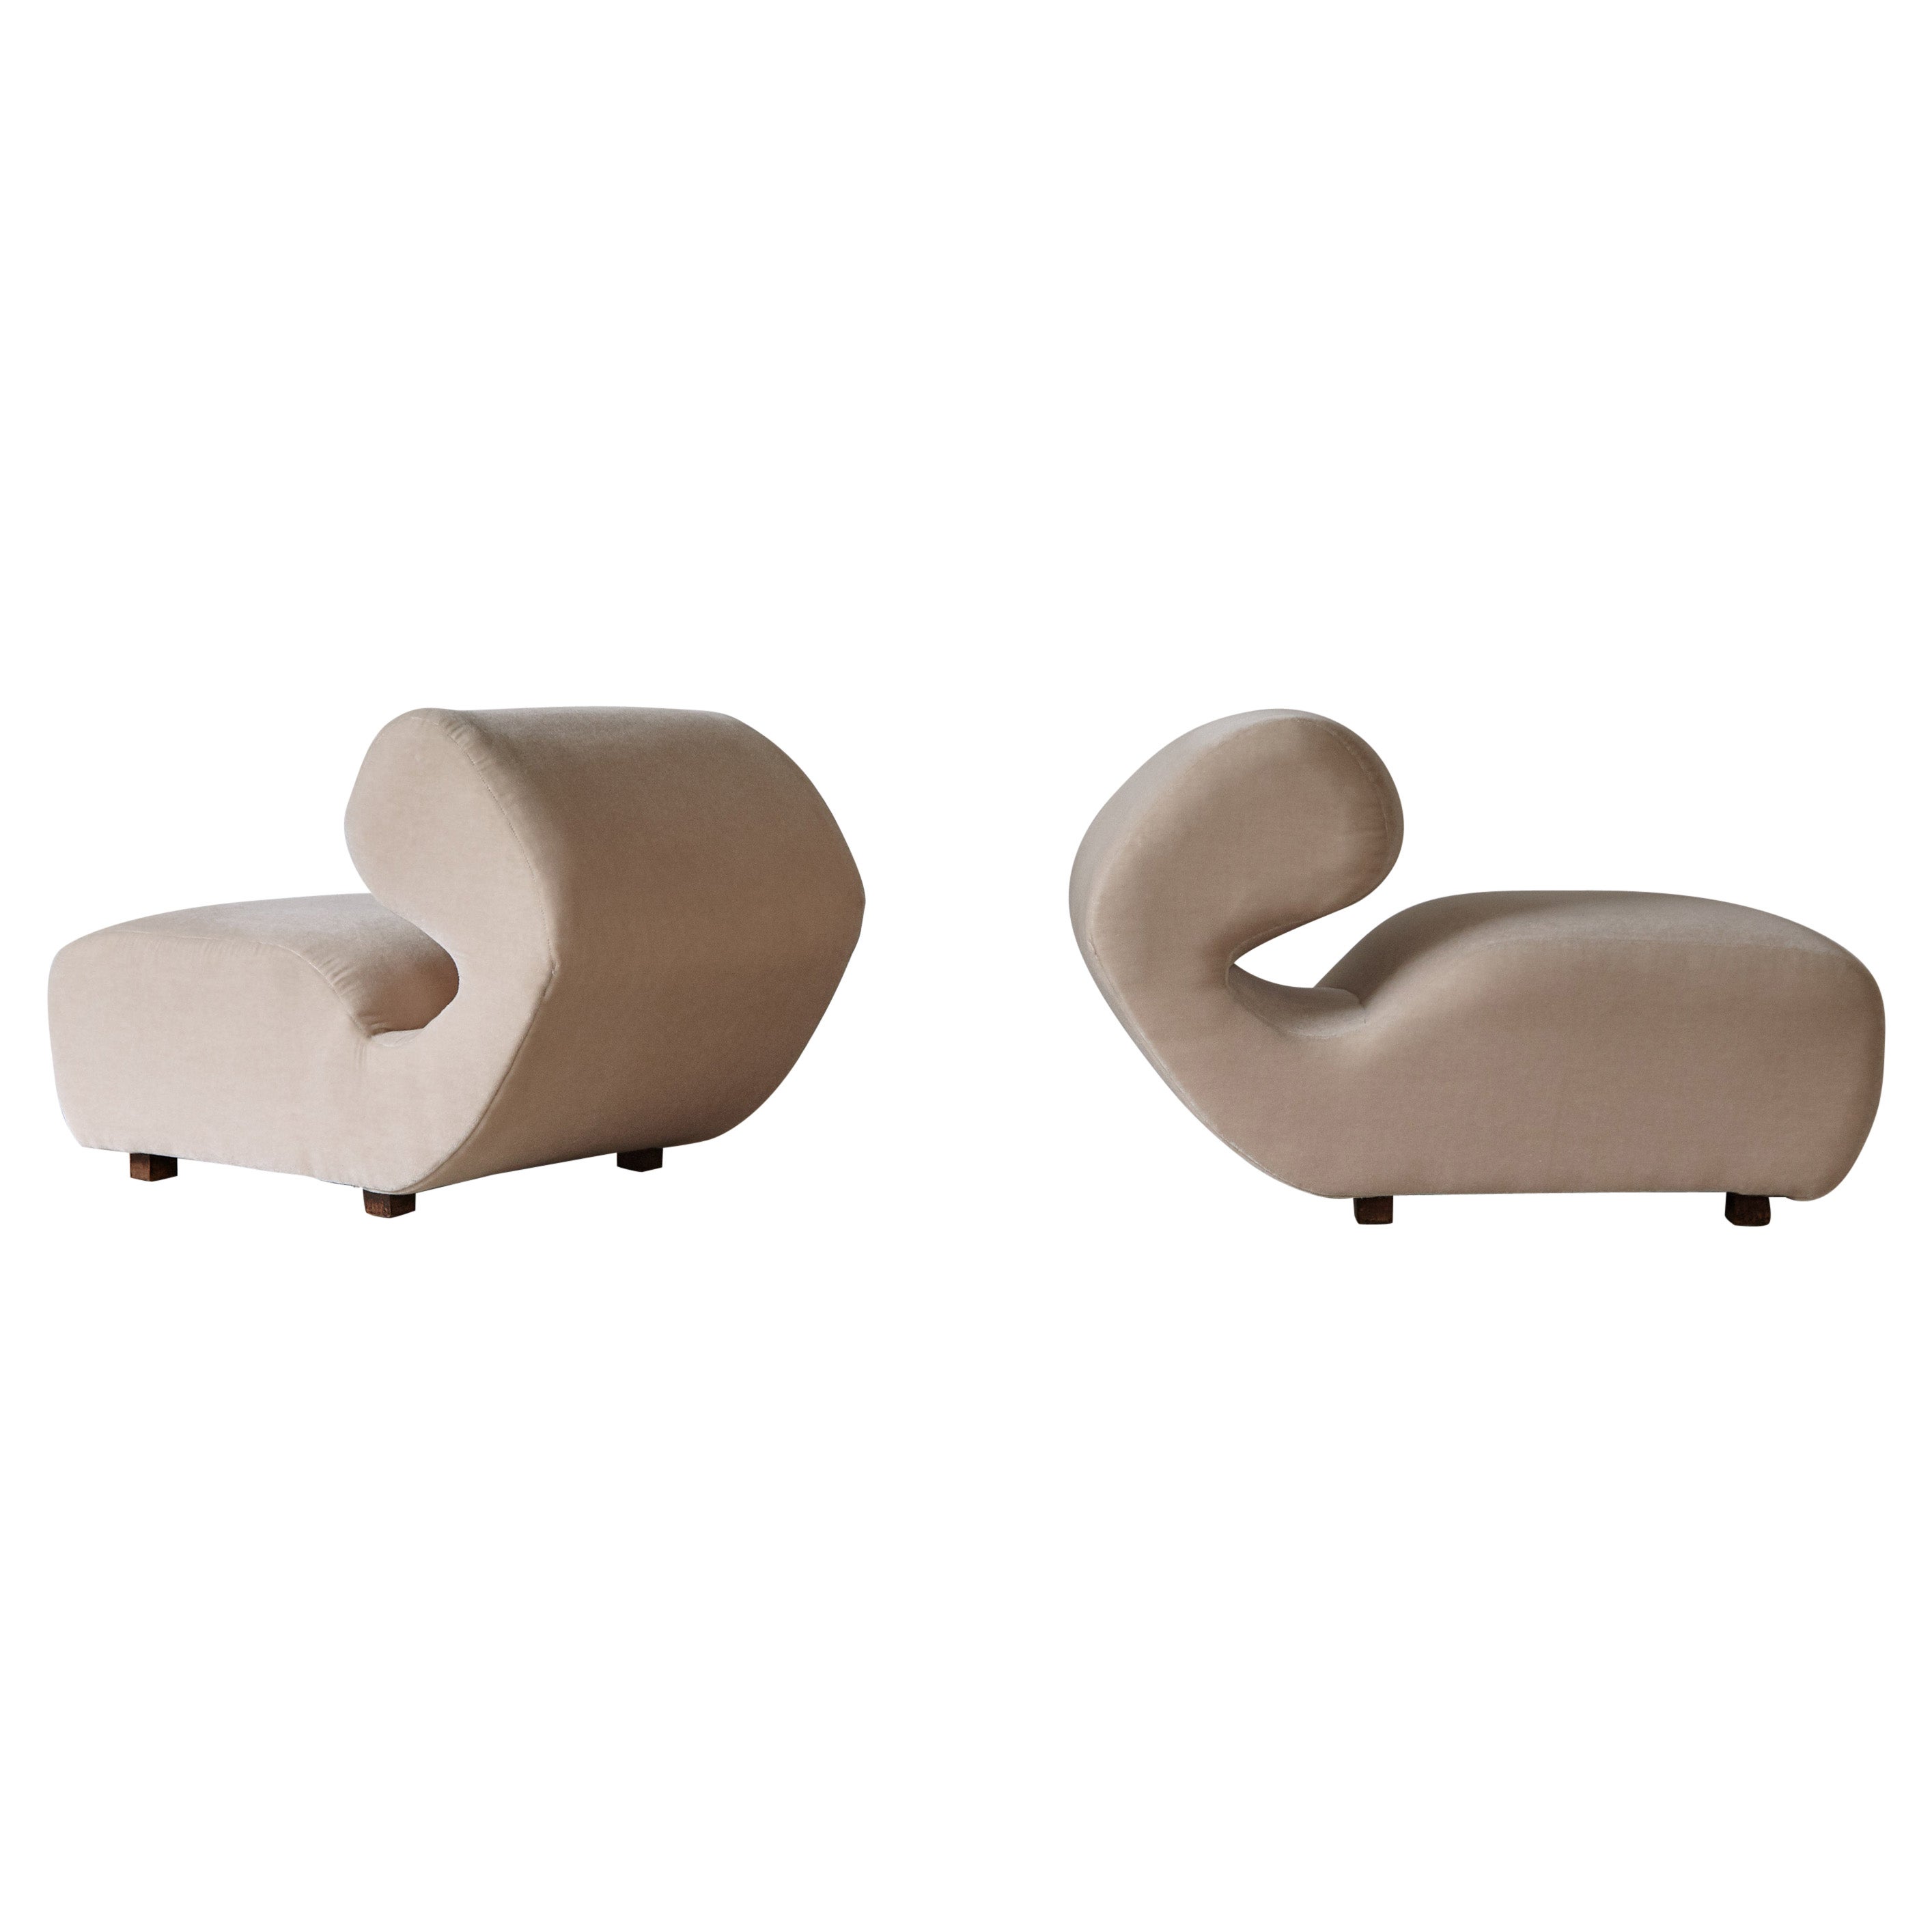 Rare Sculptural Chairs in Mohair, Italy, 1970s / 80s For Sale